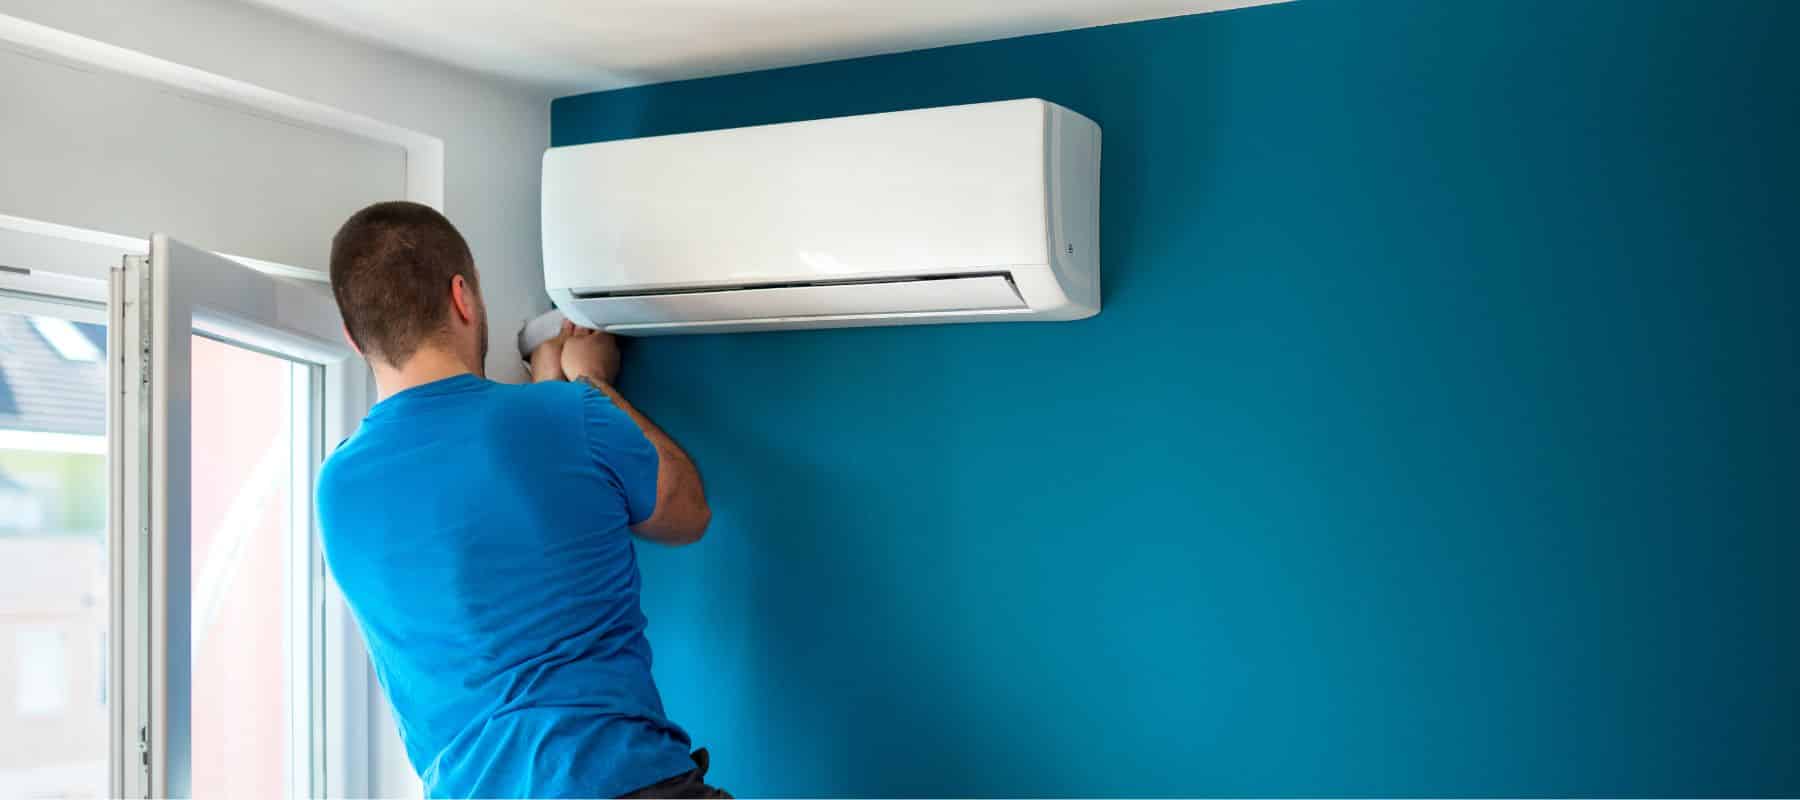 A person in a blue shirt is installing or repairing a white air conditioning unit on a vibrant blue wall. The individual's focus is on the task at hand, as they reach up to adjust or fix something on the bottom of the unit